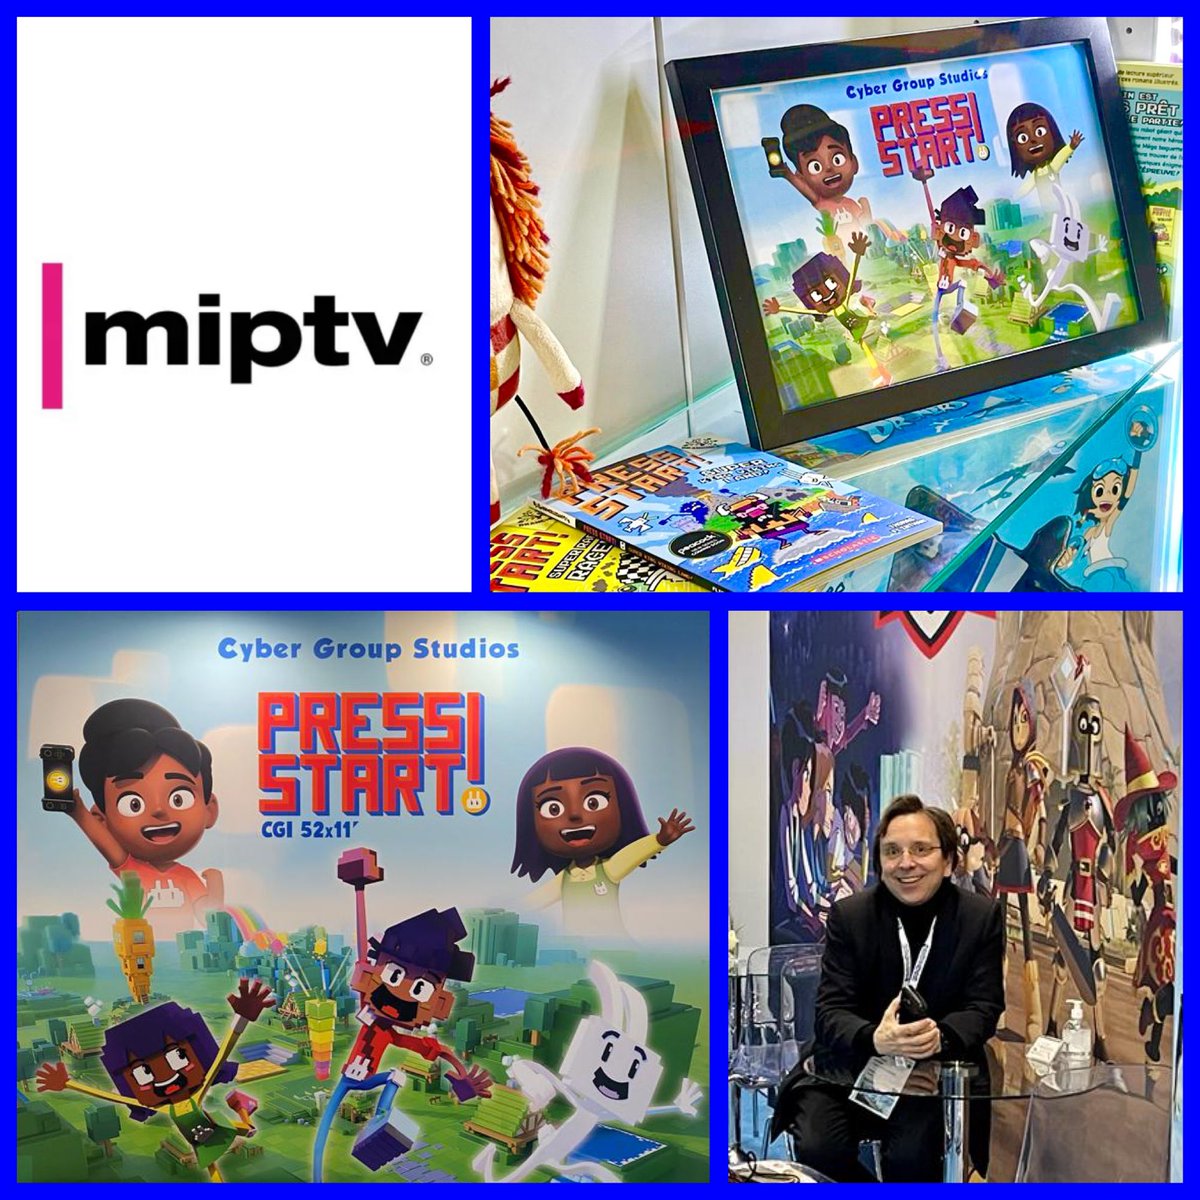 #MIPTV Day 2 🌟 our Chairman and CEO, Dominique Bourse is in Cannes with the rest of the dream team. See you all really soon booth 📍R7D22📍to learn more about our projects in developement and new series #Cannes #kidsprograms #content @mip #animatedcontent #development